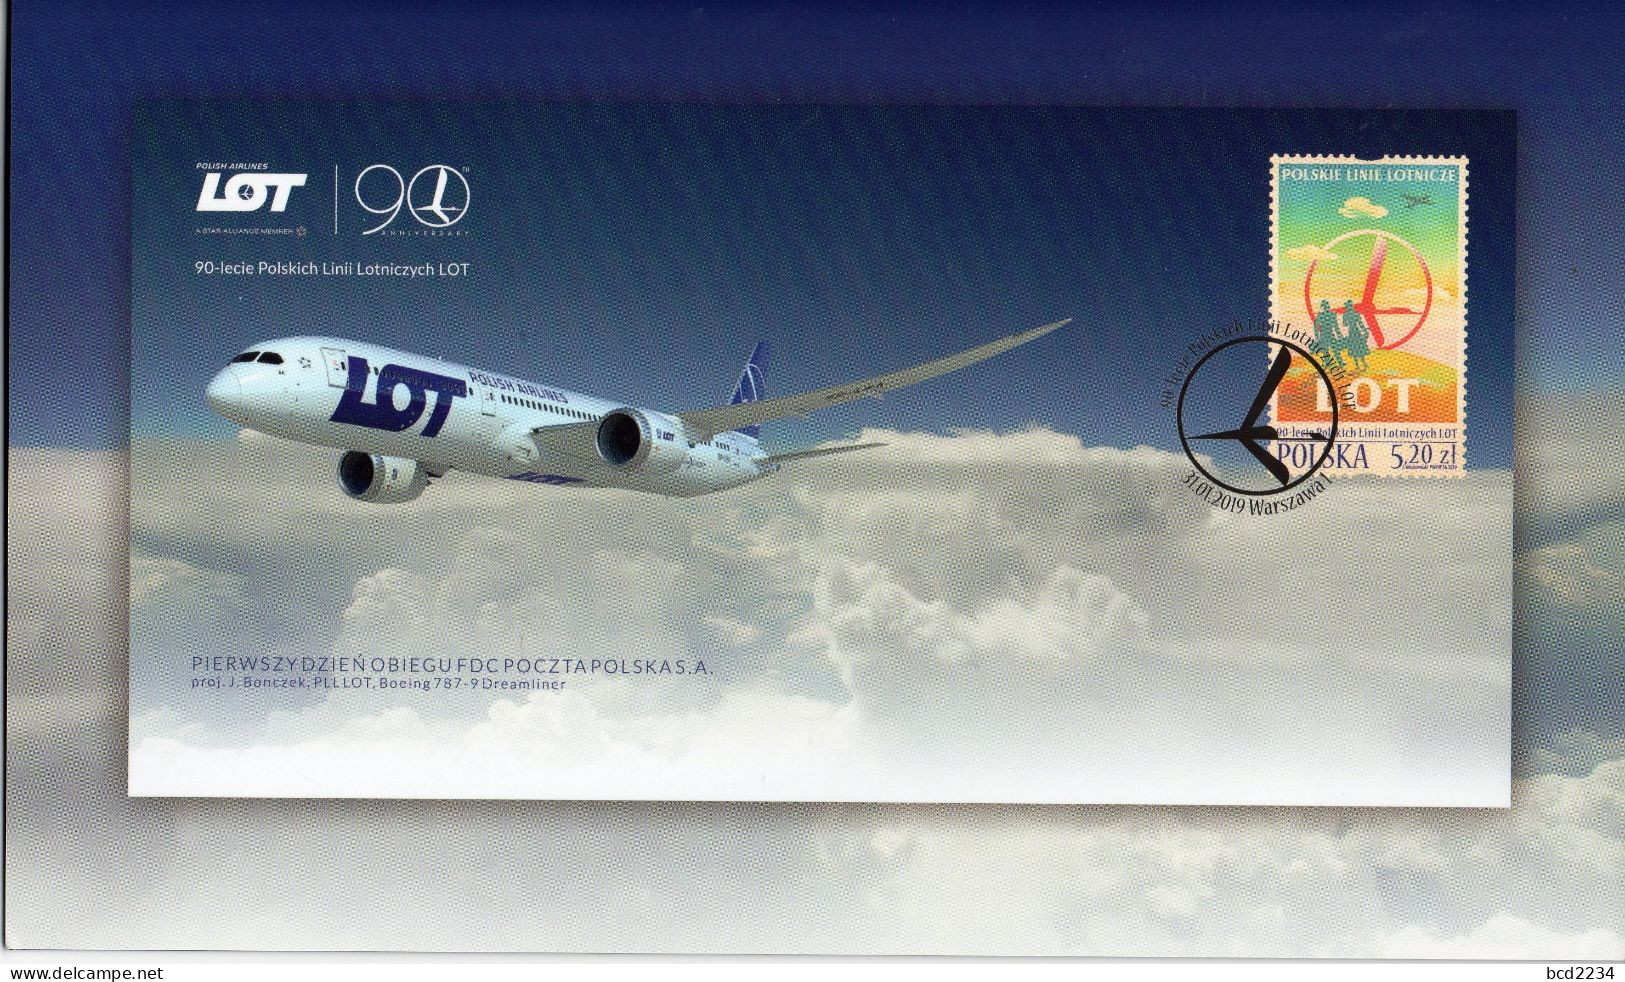 POLAND 2019 POST OFFICE SPECIAL LIMITED EDITION FOLDER: 90 YEARS OF LOT POLISH AIRLINES PLANES FLIGHT AIRCRAFT - Covers & Documents